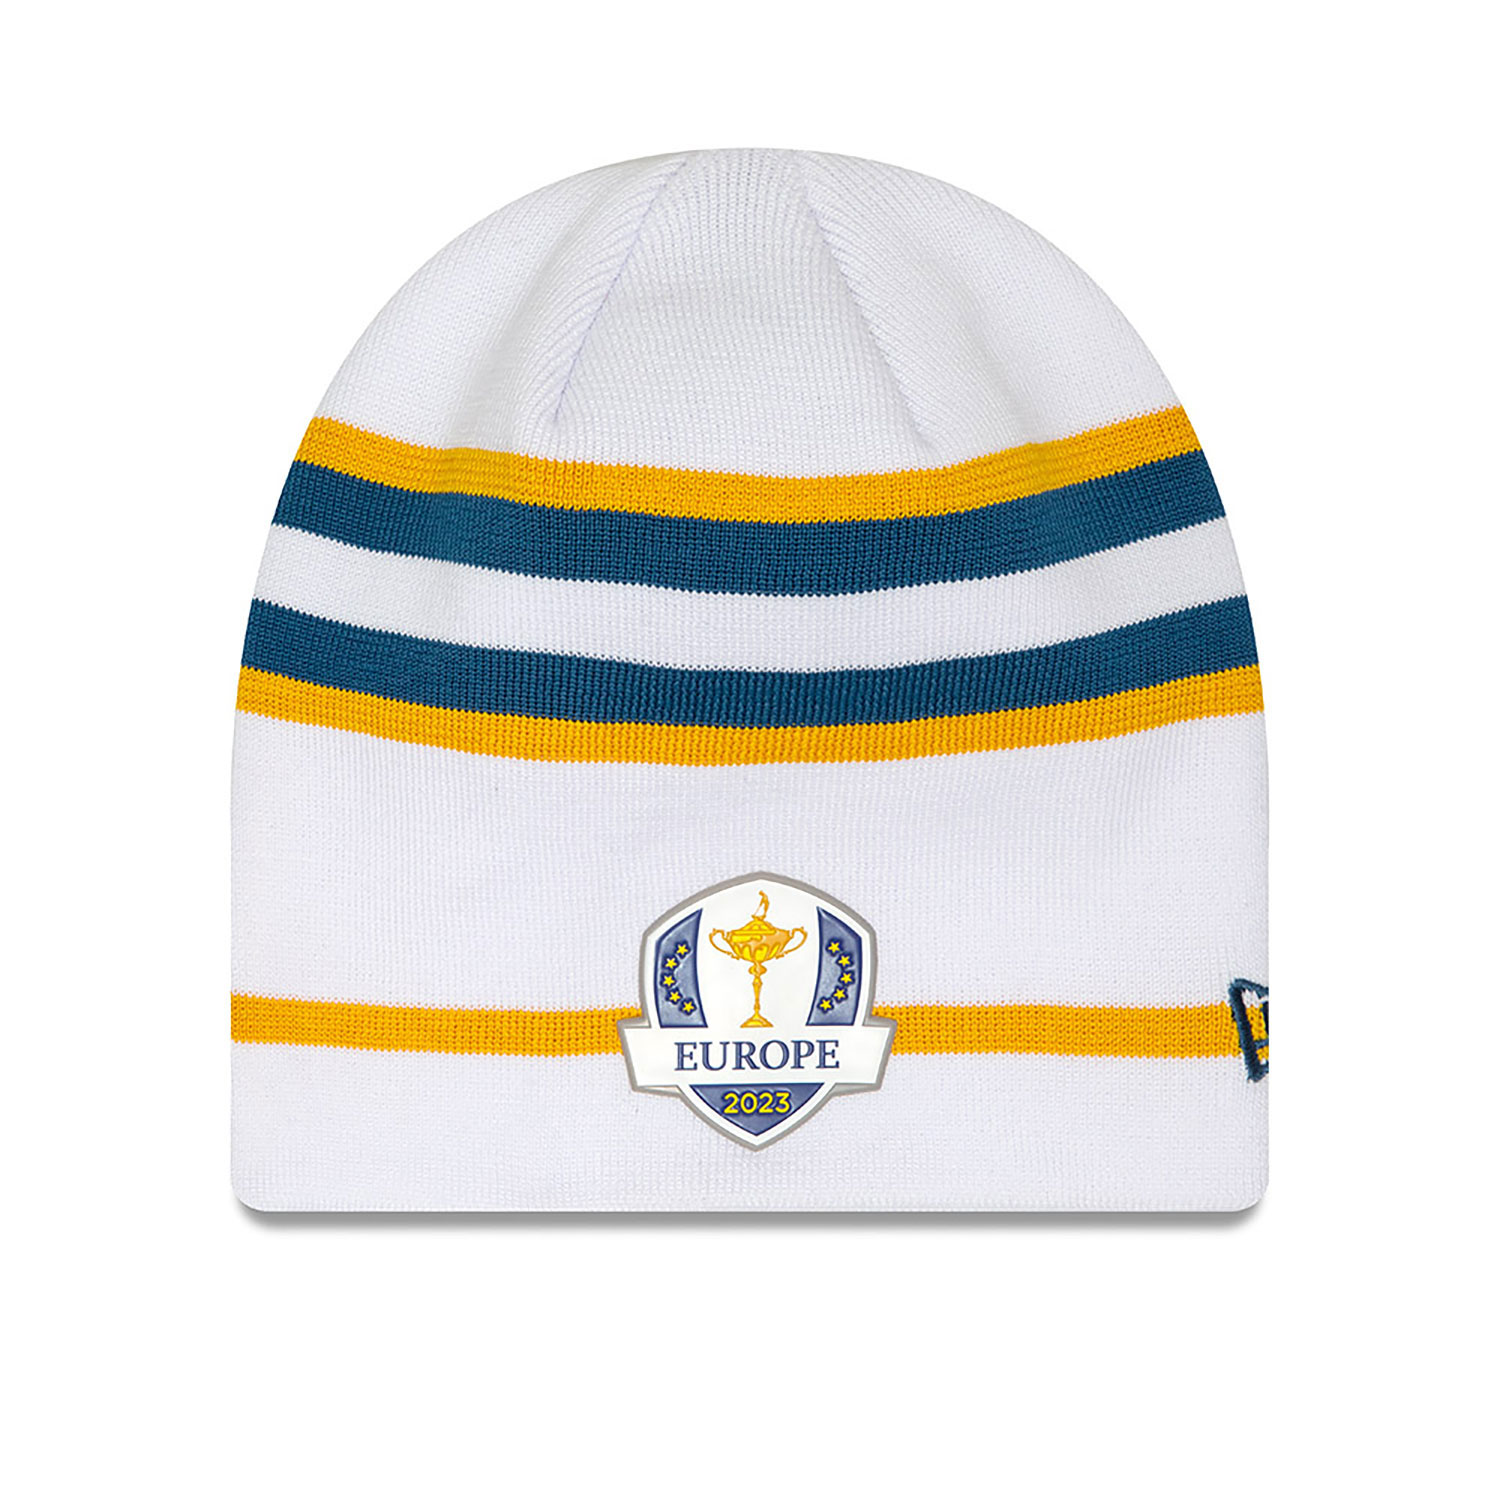 Sunday Competition Day Ryder Cup Europe 2023 Skull Knit Beanie Hat